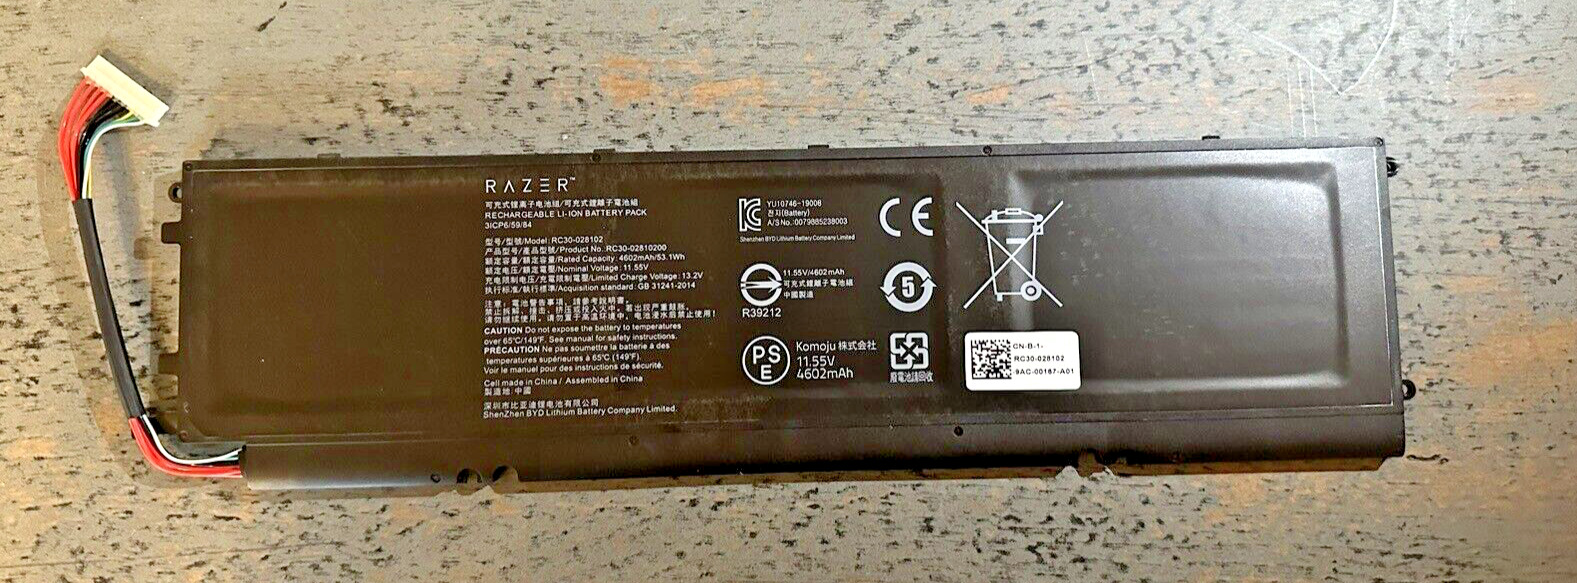 Used Razer RC30-028102 RC30-028102 RC30-0281 Battery for Blade stealth ...